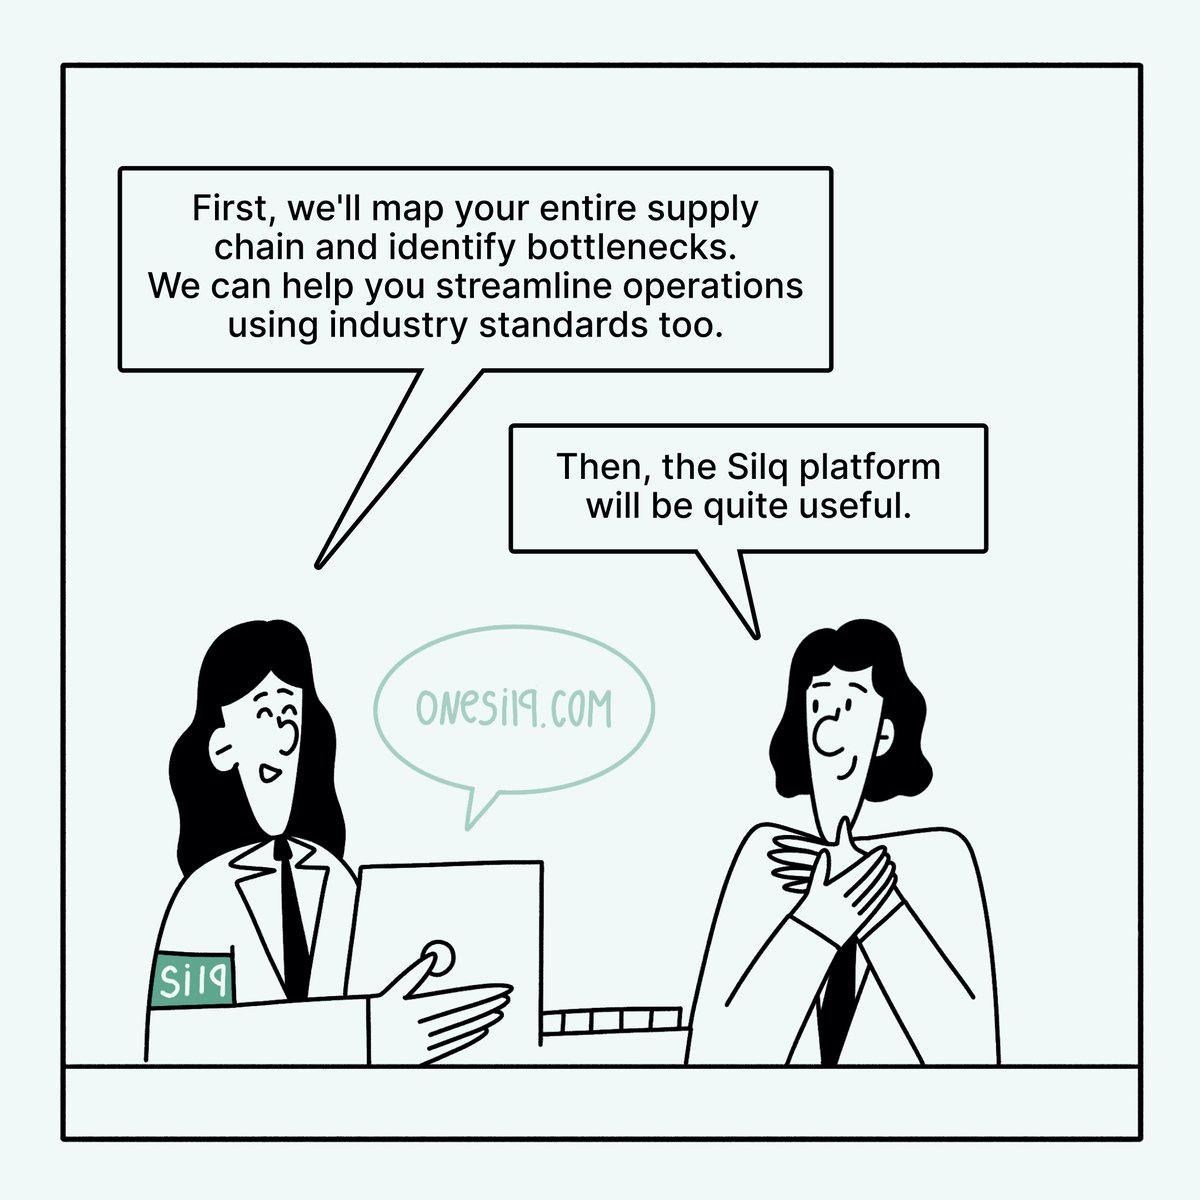 Explore the comic and delve into the full article to discover how you too can enhance efficiency and minimize logistics costs: onesilq.com/blog/minimizin…

#SupplyChainExcellence #OptimizedLogistics #EnhancedEfficiency #supplychain #efficiency #logistics